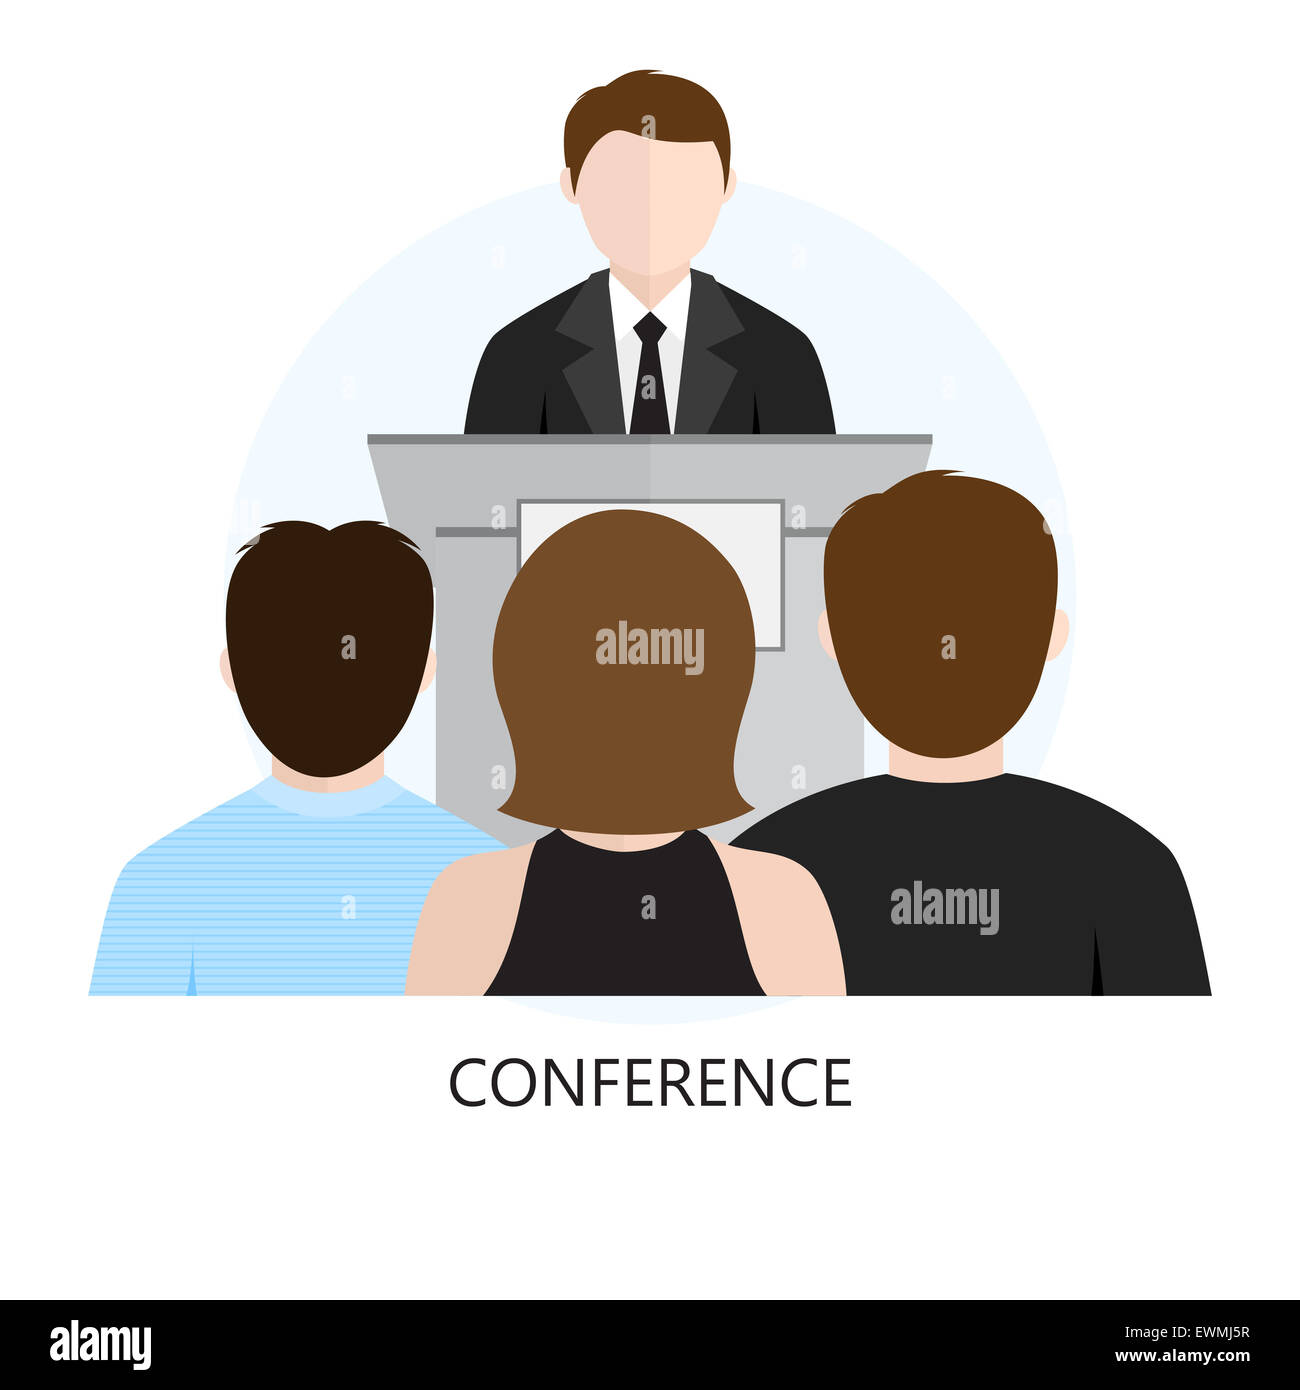 Conference Icon Flat Design Concept Isolated on White Background Stock Photo